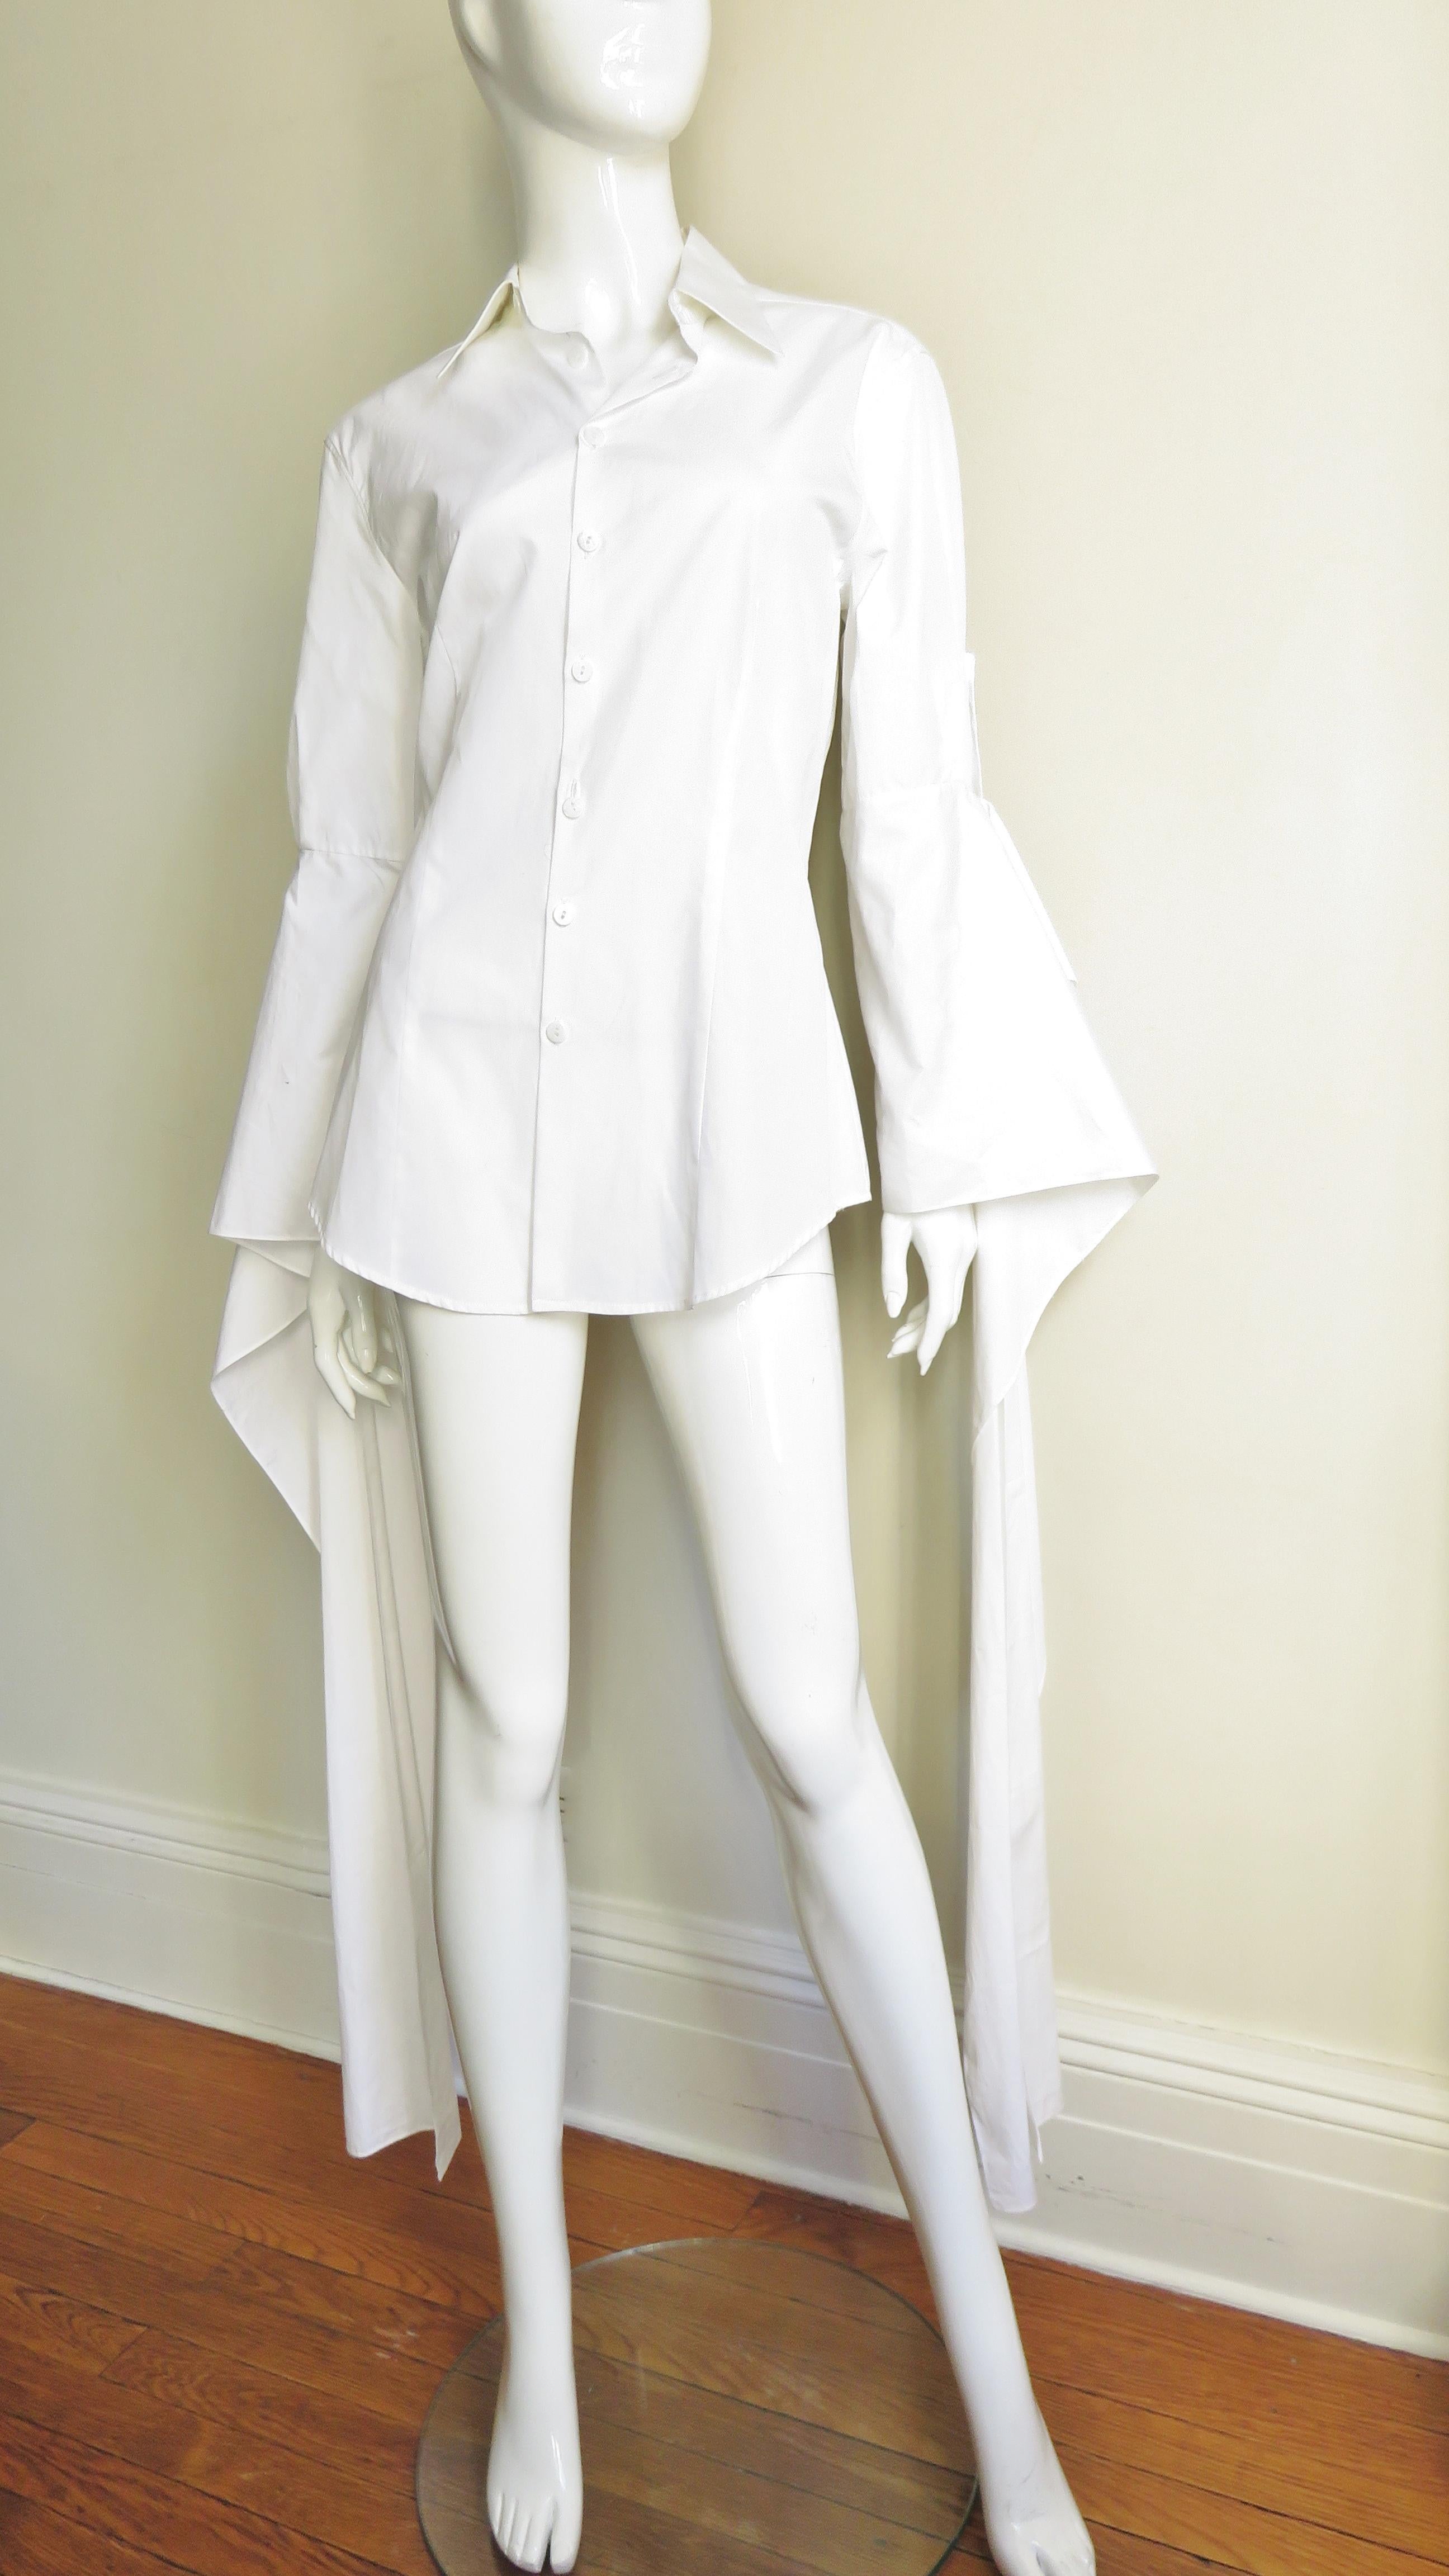 Jean Paul Gaultier New Shirt with Drape Sleeves For Sale 2